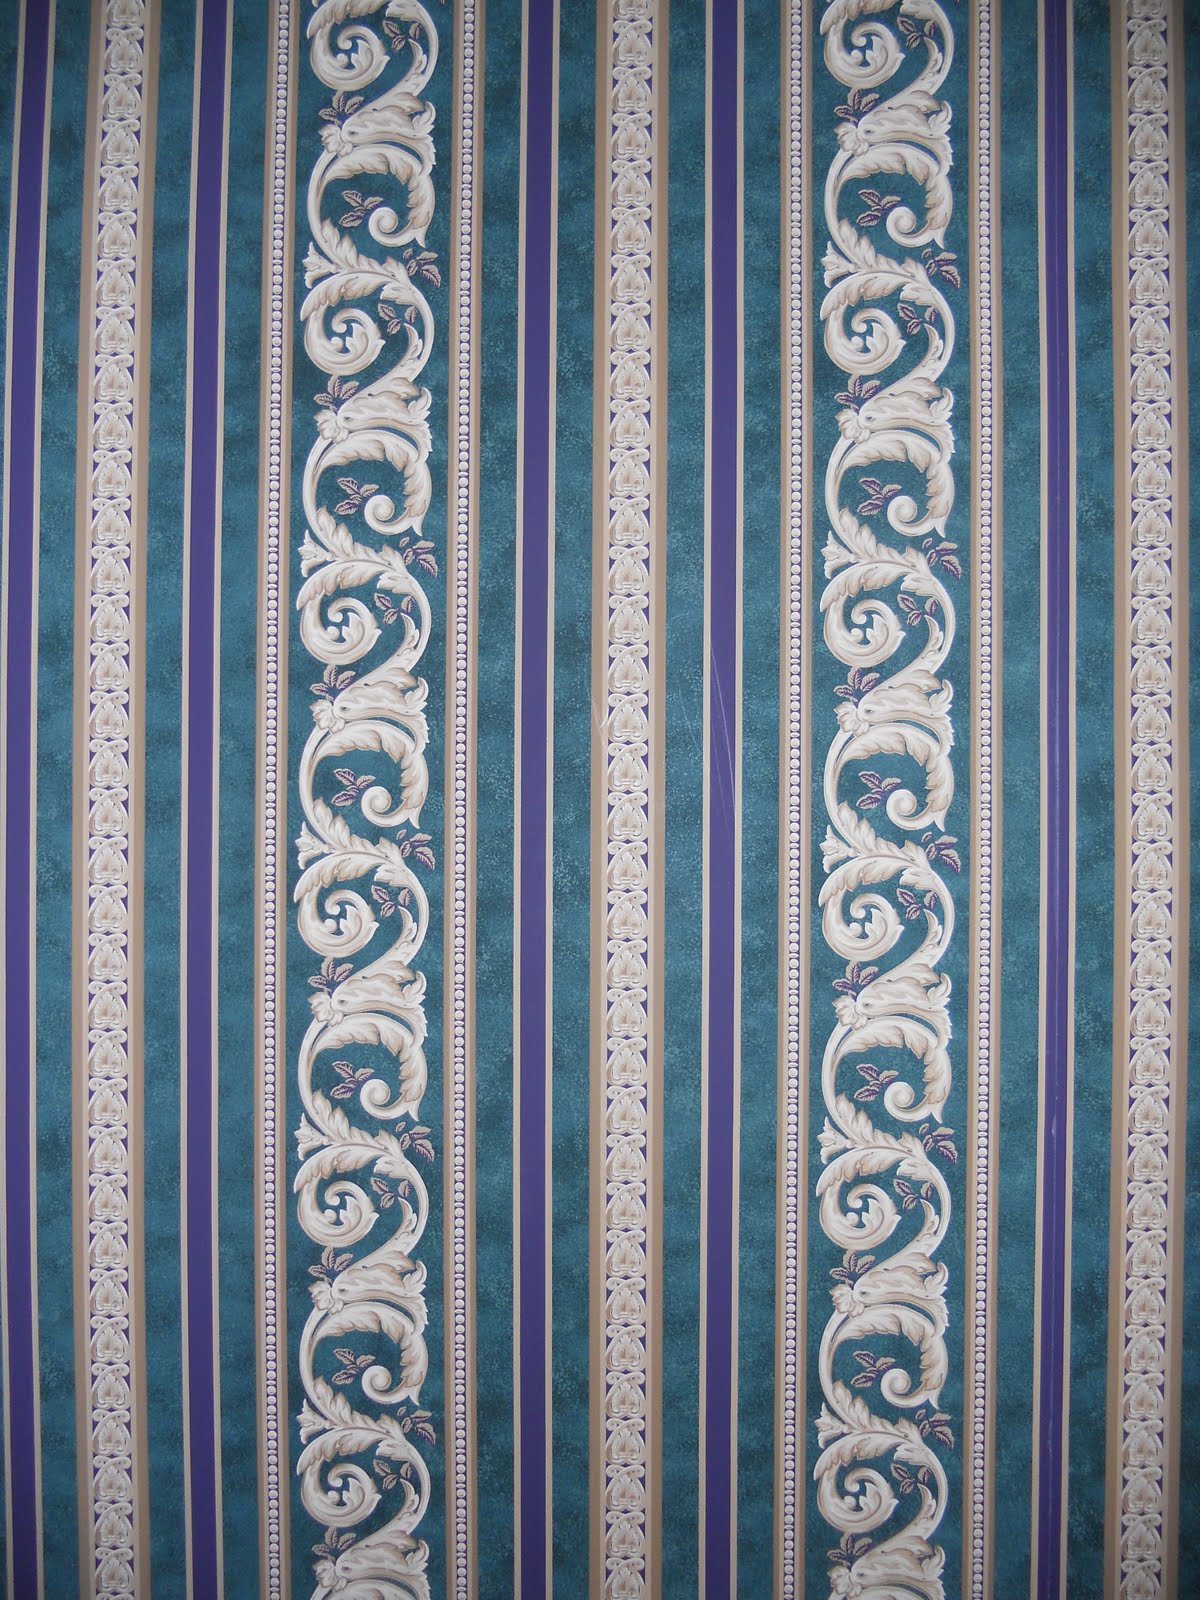 have actually heard someone say about this wallpaper pattern: 